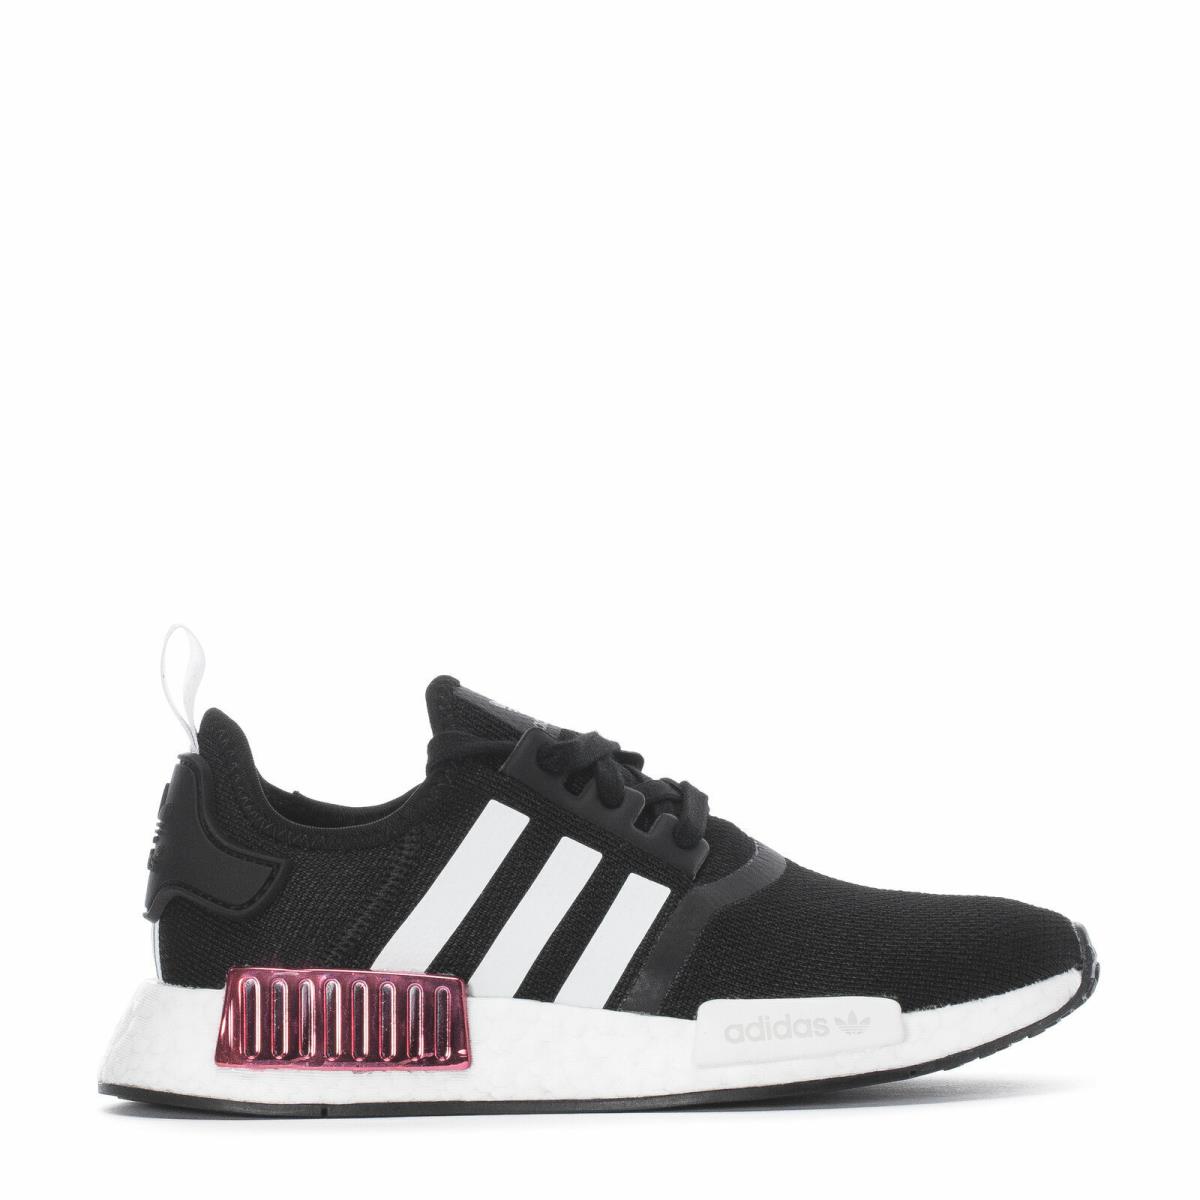 Adidas NMD_R1 Women`s Shoes Black White Rose FY3771